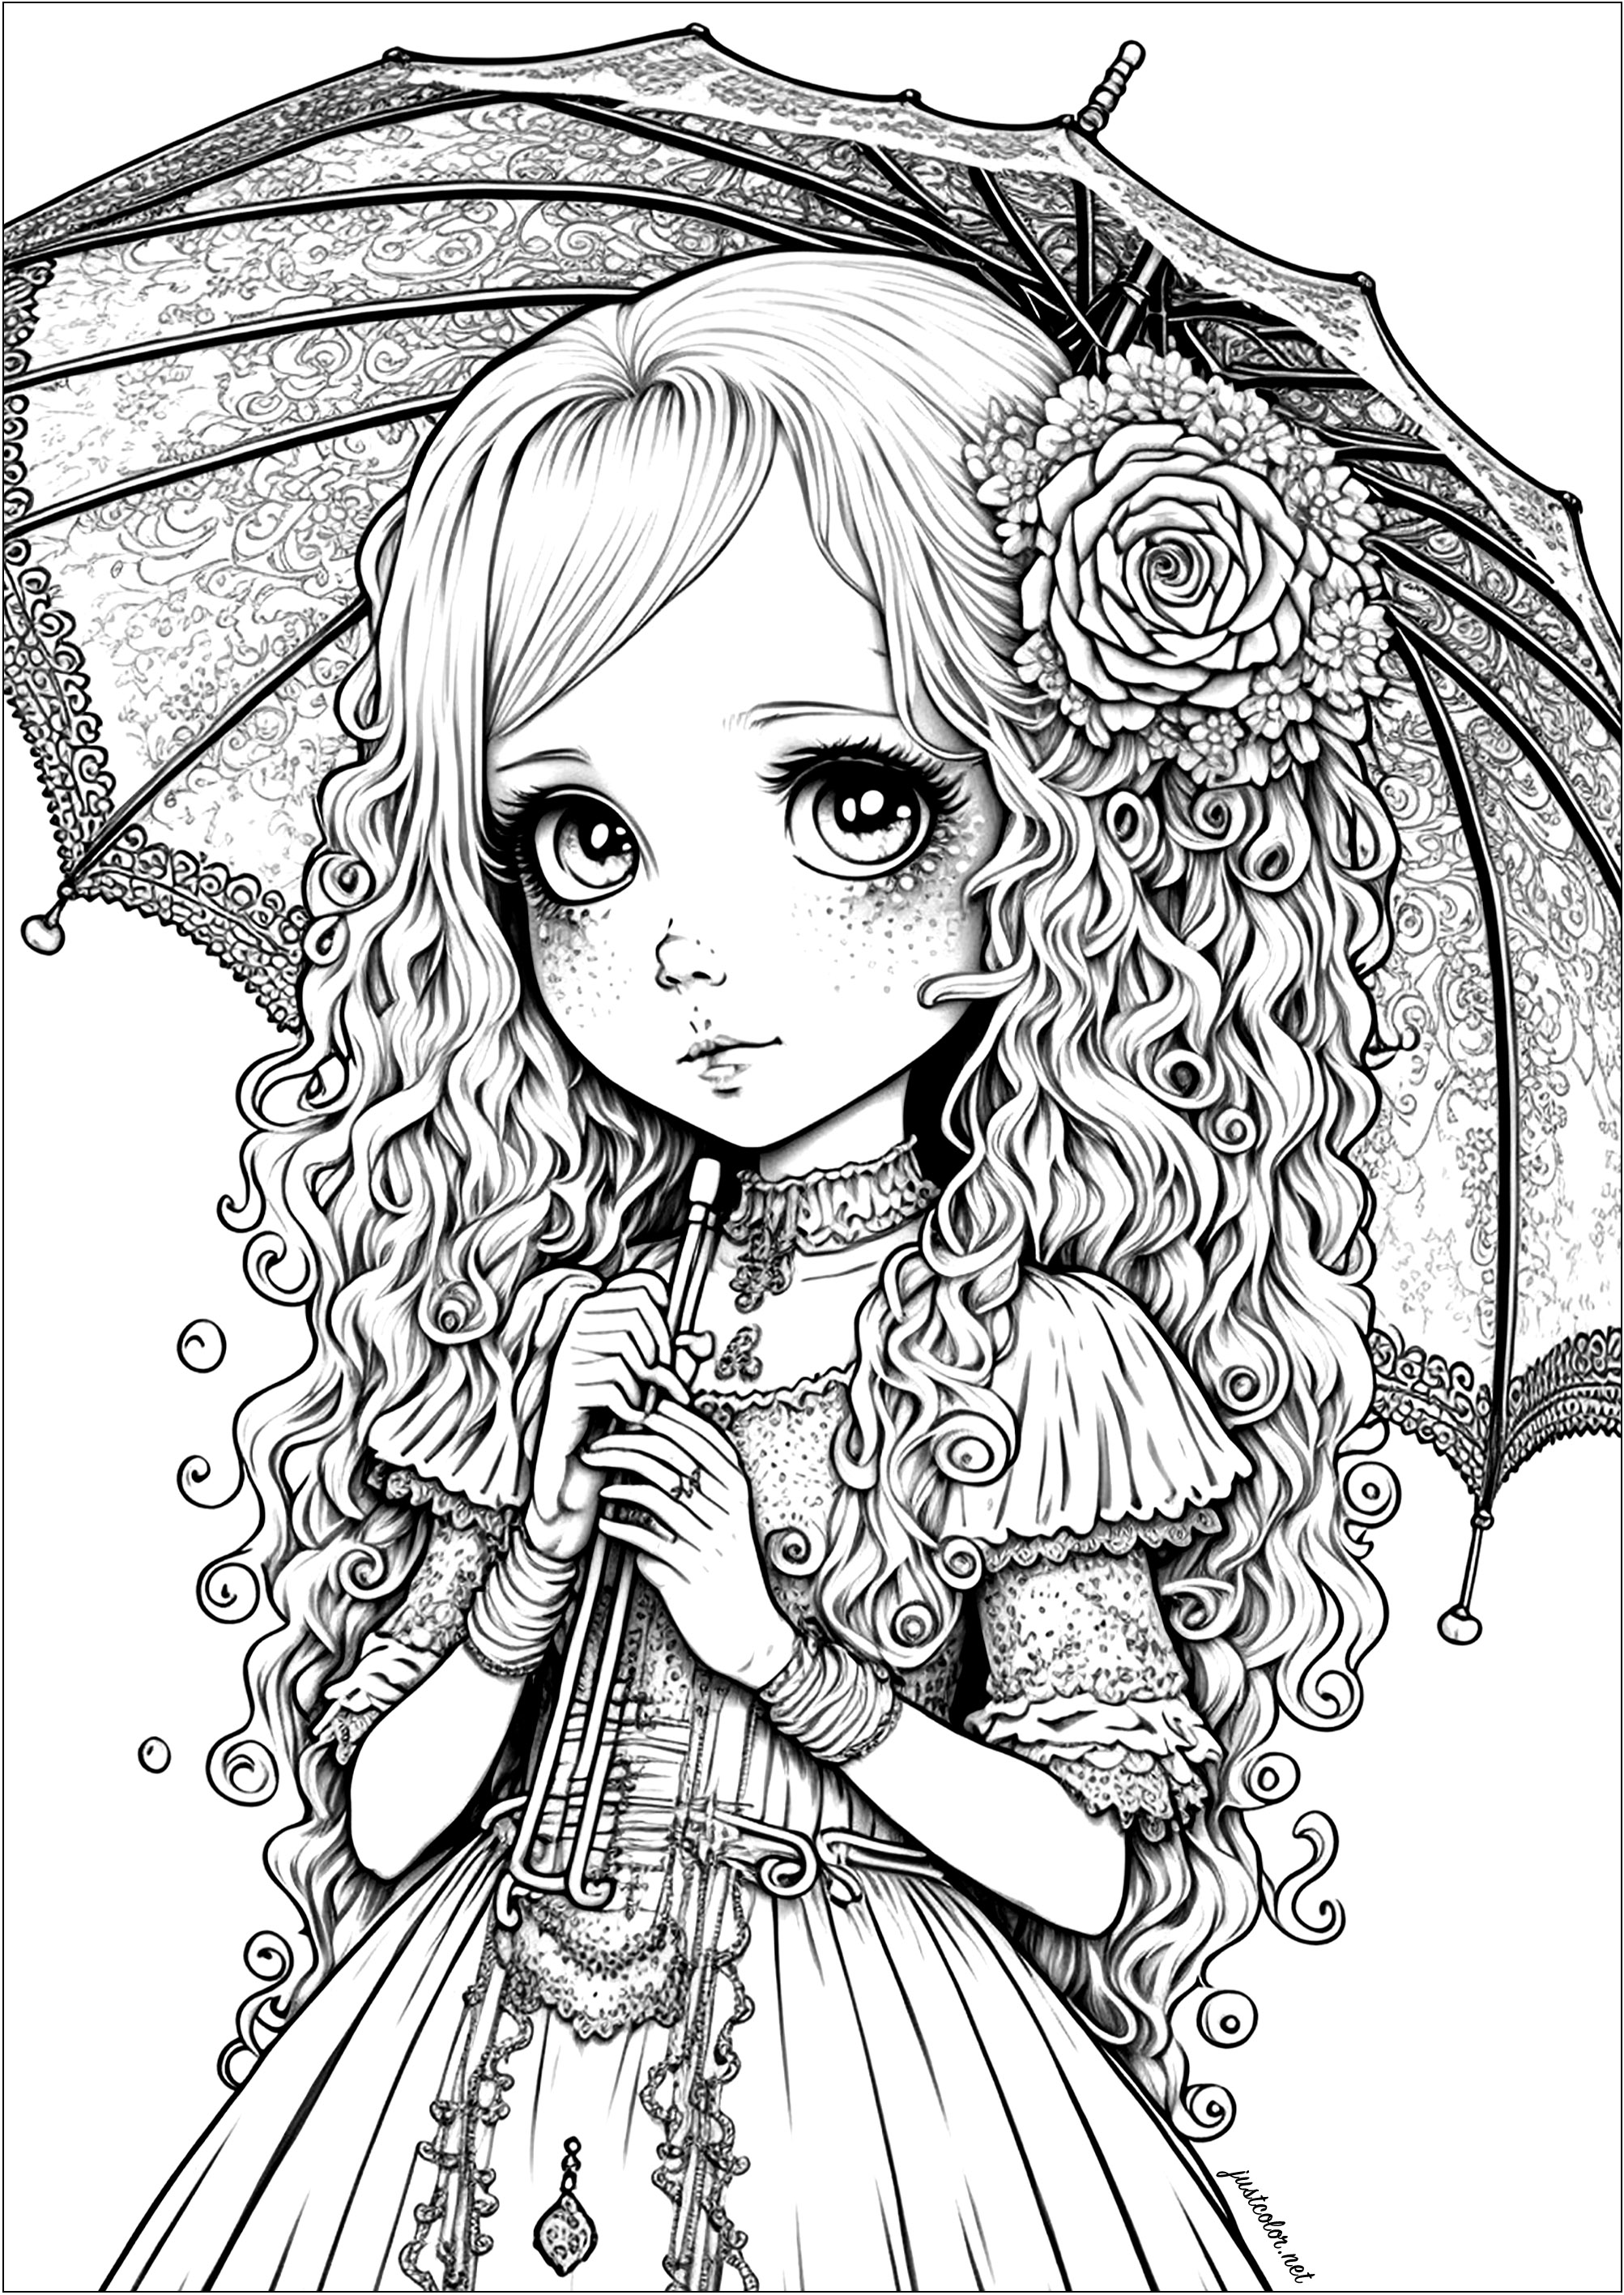 Buy Princess Unicorn Coloring Book: Cute Anime Manga Girl Coloring Book  with Magical Fantasy Animals, Cute Princesses Kawaii Anime Style, Female  Japanese ... and Fun - Vol1 (Inkway Anime Coloring Zone) Online